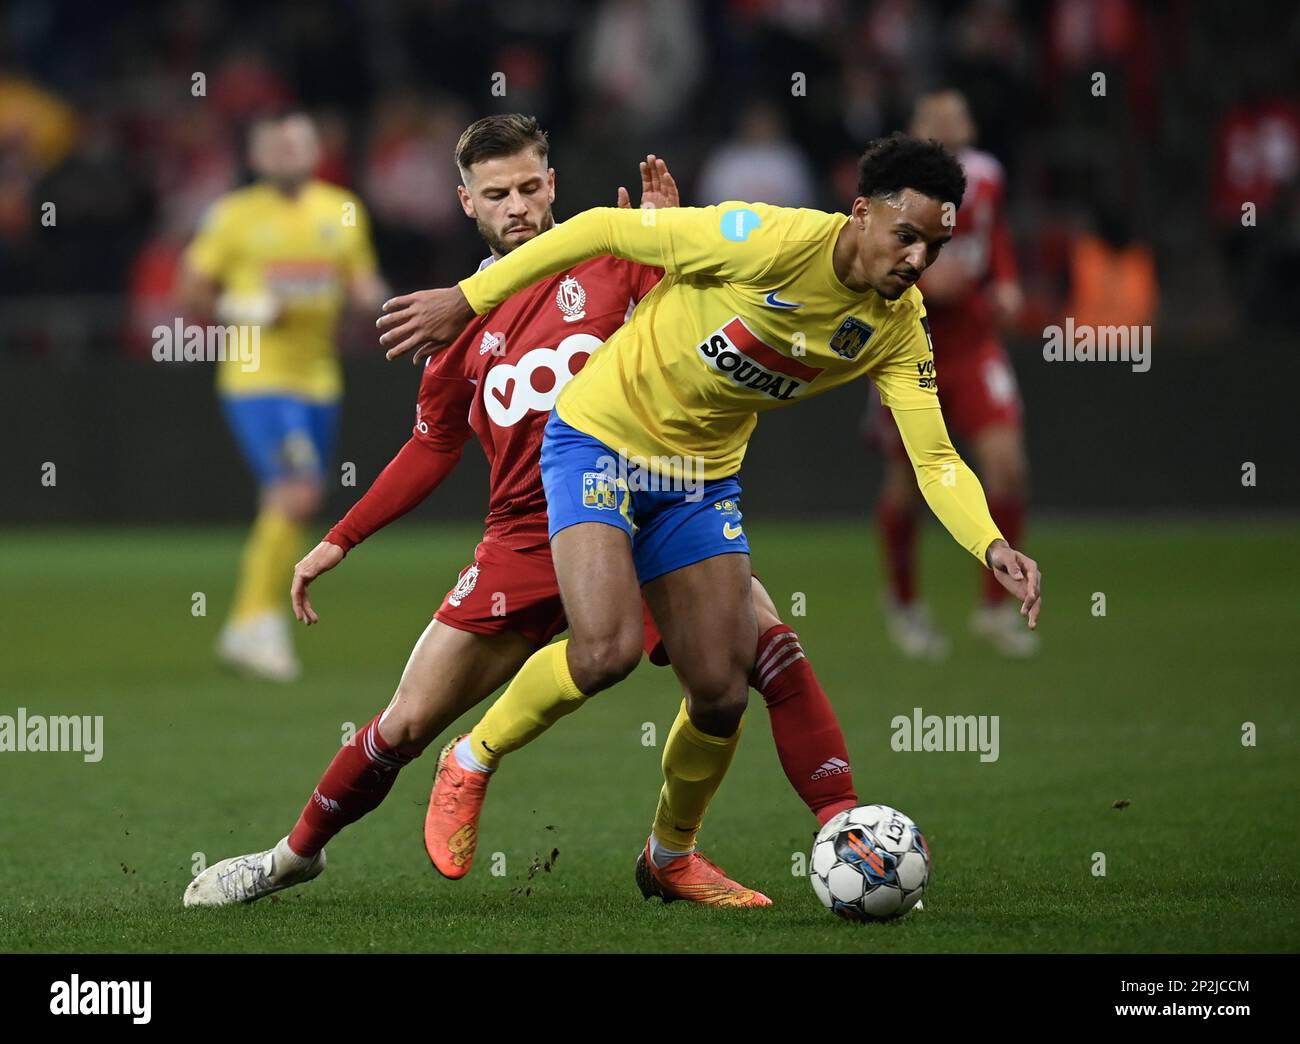 Standard's Philip Zinckernagel and Westerlo's Bryan Reynolds fight for the  ball during a soccer match between Standard de Liege and KVC Westerlo,  Saturday 04 March 2023 in Liege, on day 28 of